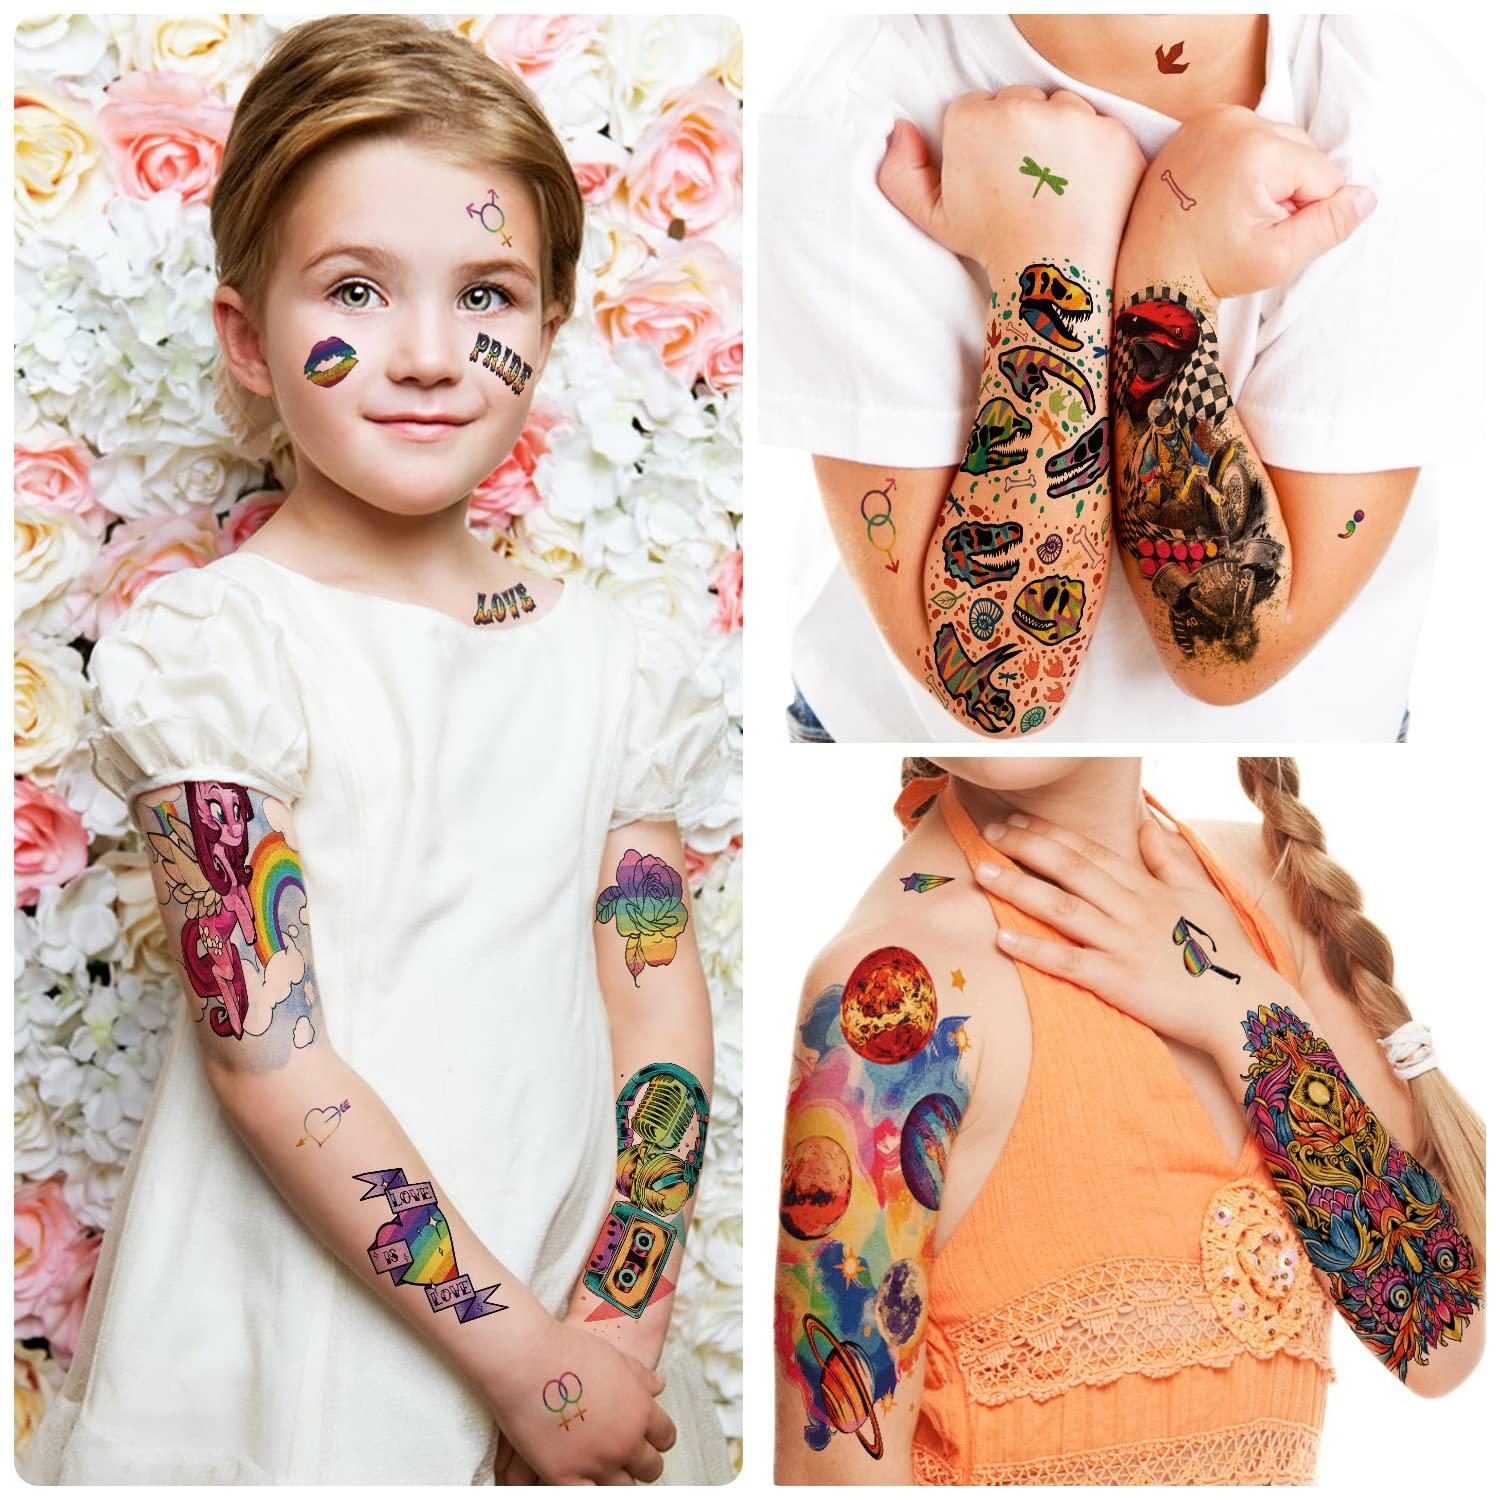 Temporary Tattoo for kids, 52 PCS Fake Tattoos Temporary for Boys Girls,  Dinosaur Unicorn Body Arm Shoulder Cute Tattoos Stickers, Birthday Party  Supplies Gifts for 3 4 5 6 7 8 9 Year Old Kids